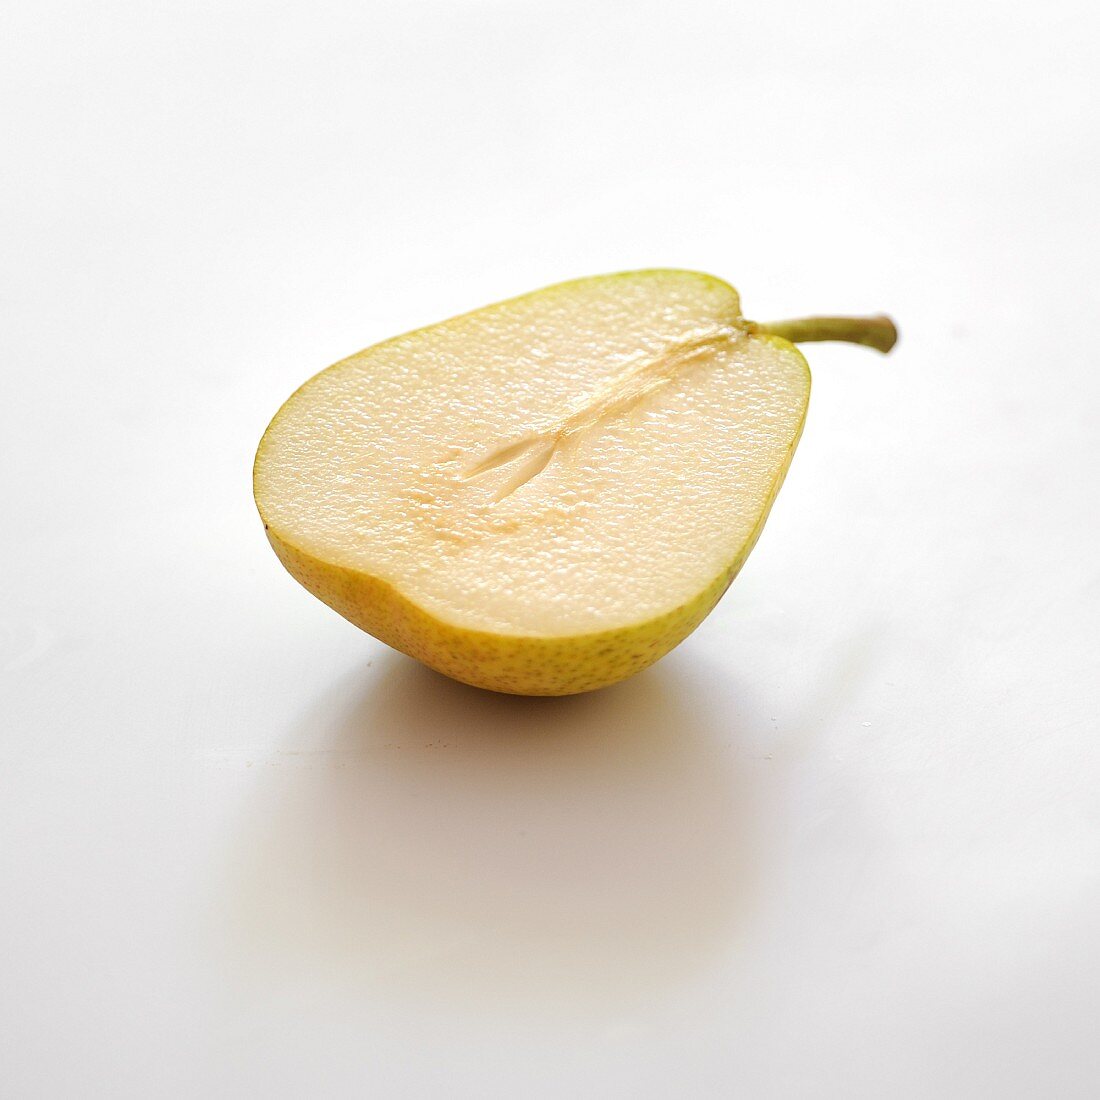 Half a Guyot pear on a white background